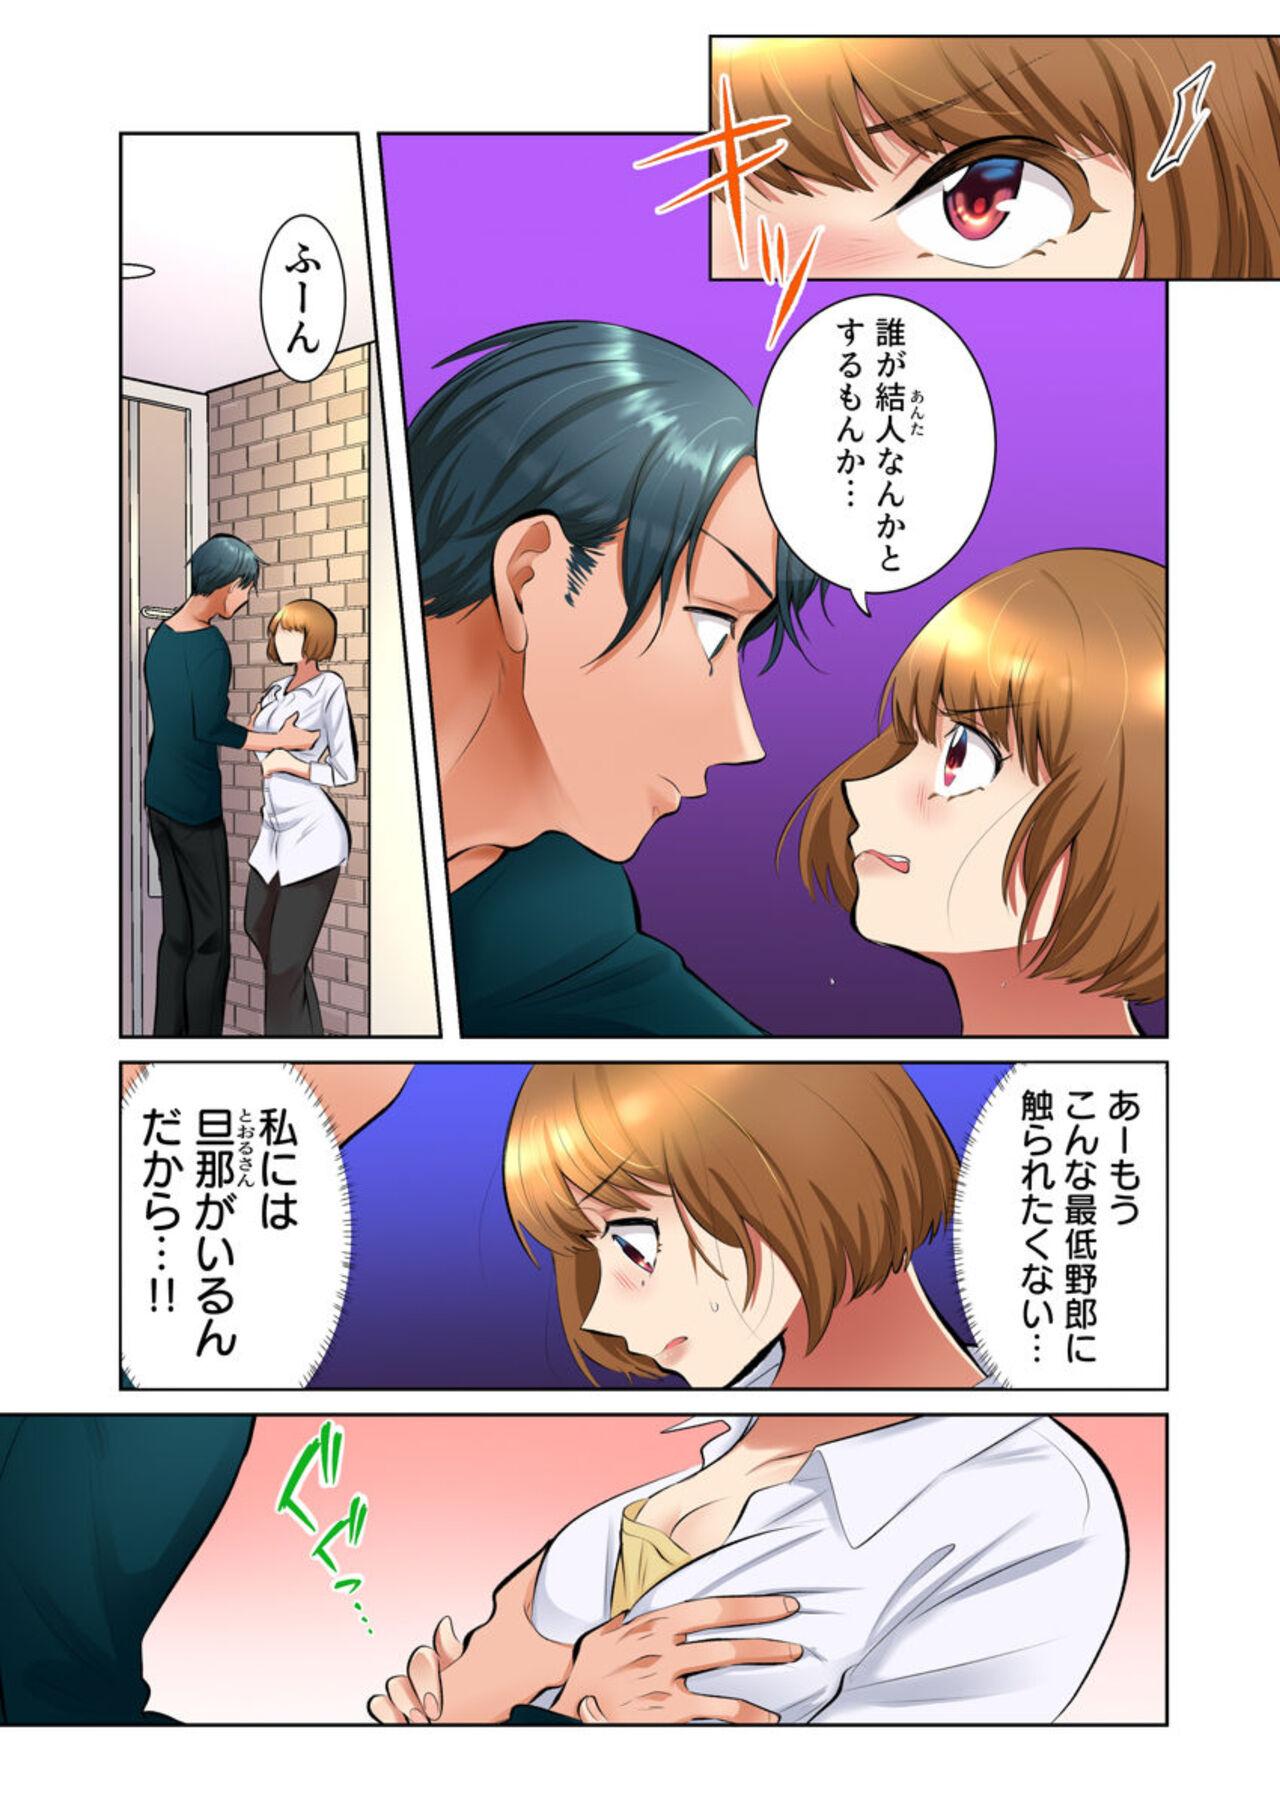 Ball Busting [Ika Hotaru] My Neighbor Is A Sadistic Ex-Boyfriend ~I Love My Husband, But My Aching Body Has Been Redeveloped~ (Full Color) 2 Australian - Page 3